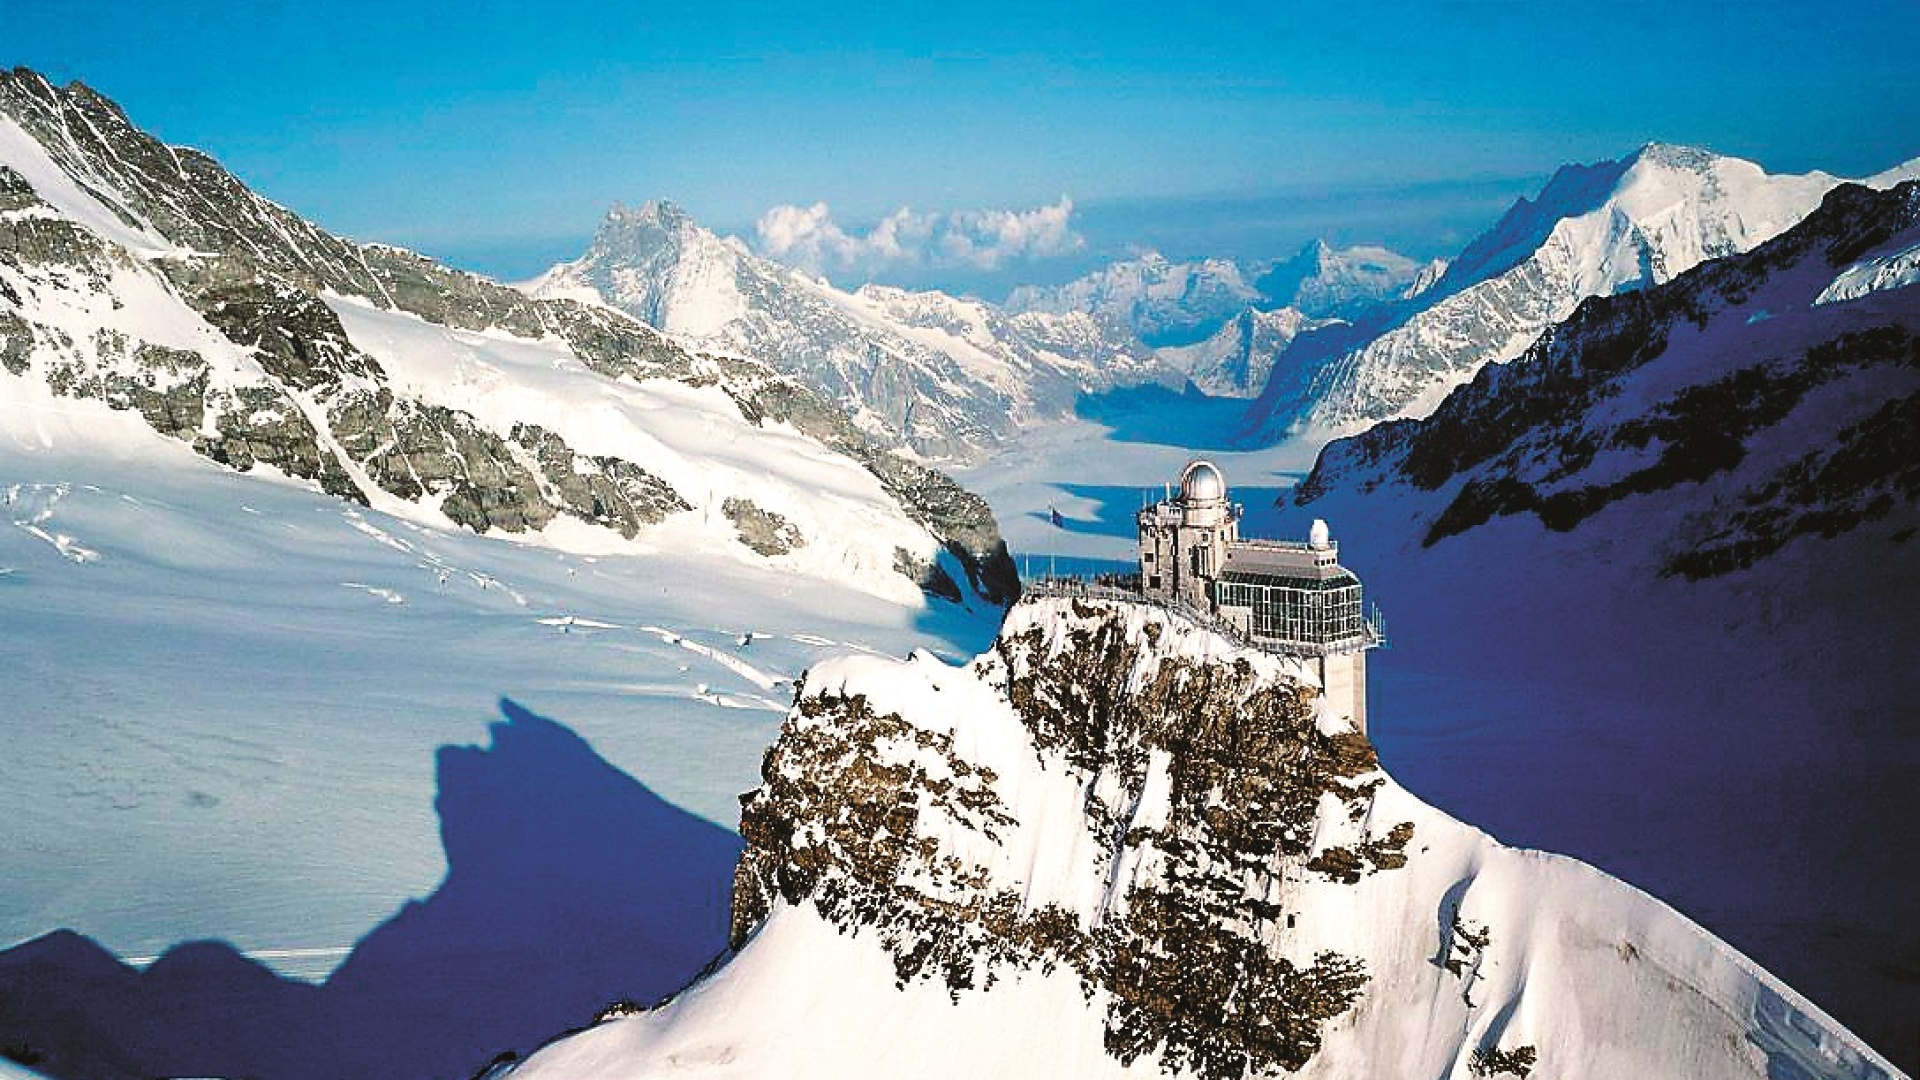 How best to go to the Jungfraujoch, Top of Europe, from Interlaken